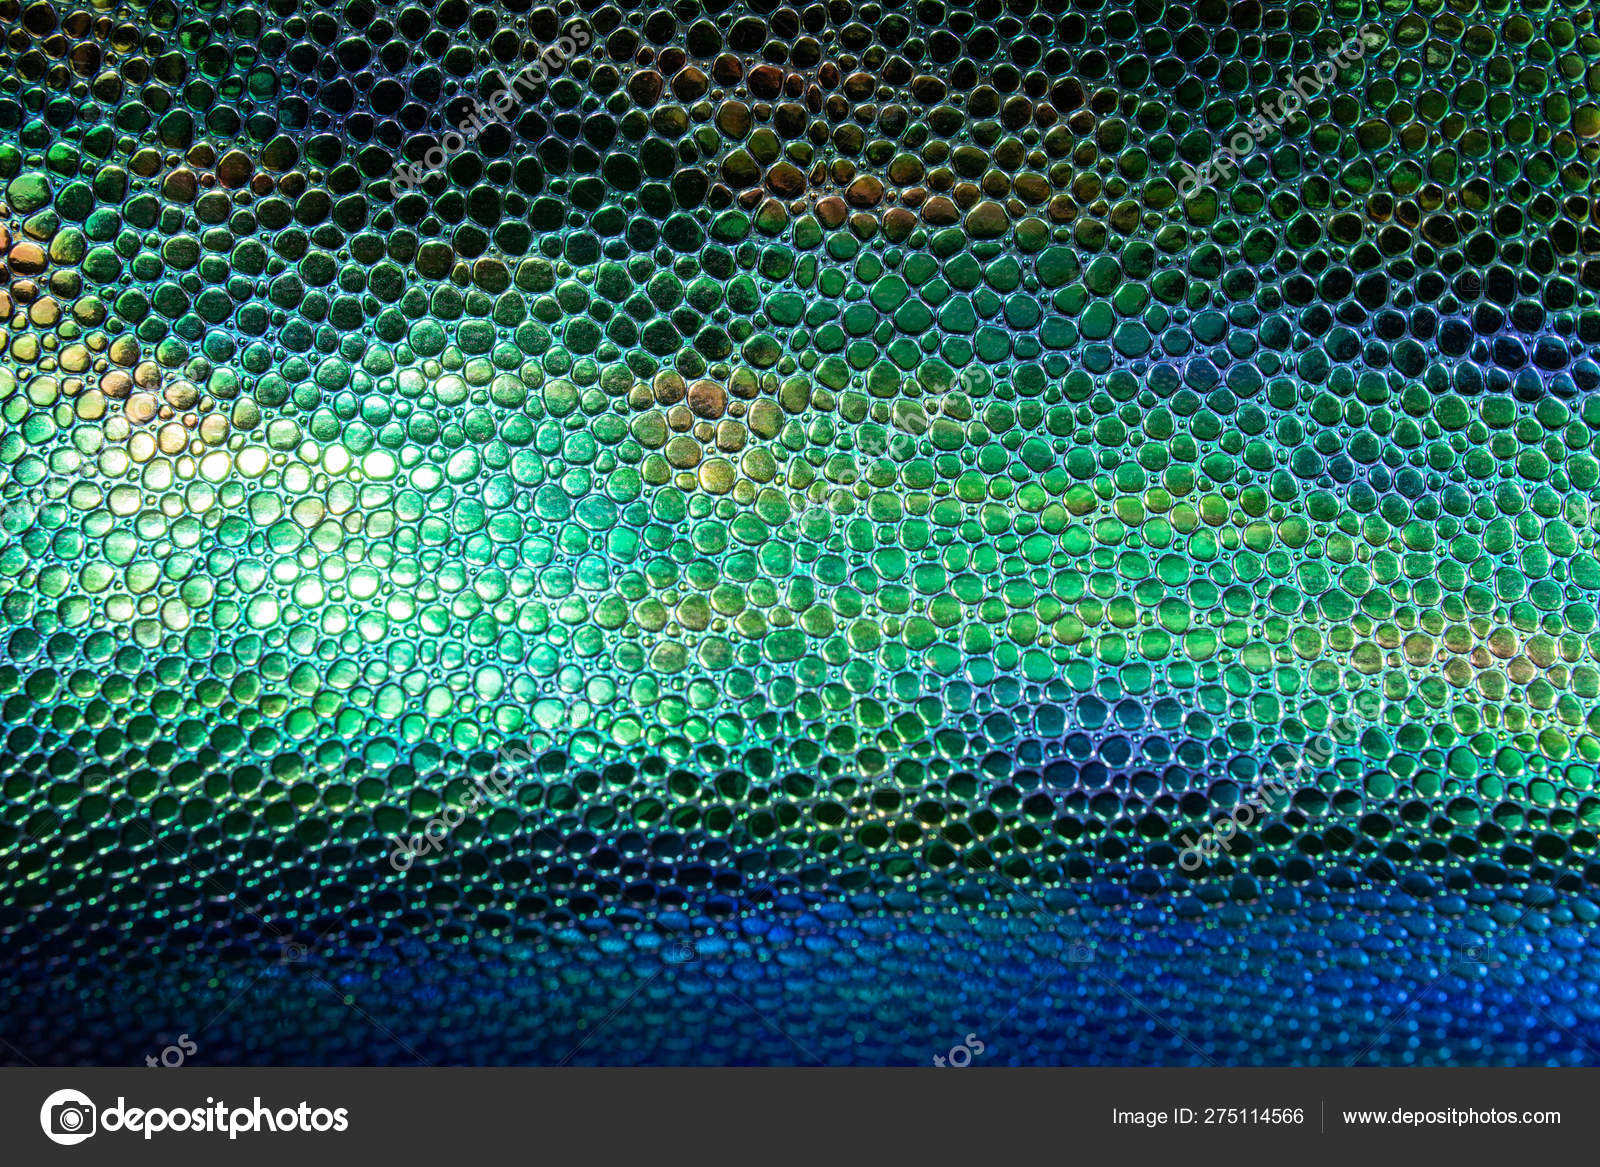 Fish or reptile scale dark moody background. Stock Photo by ©yulisitsa  275114566